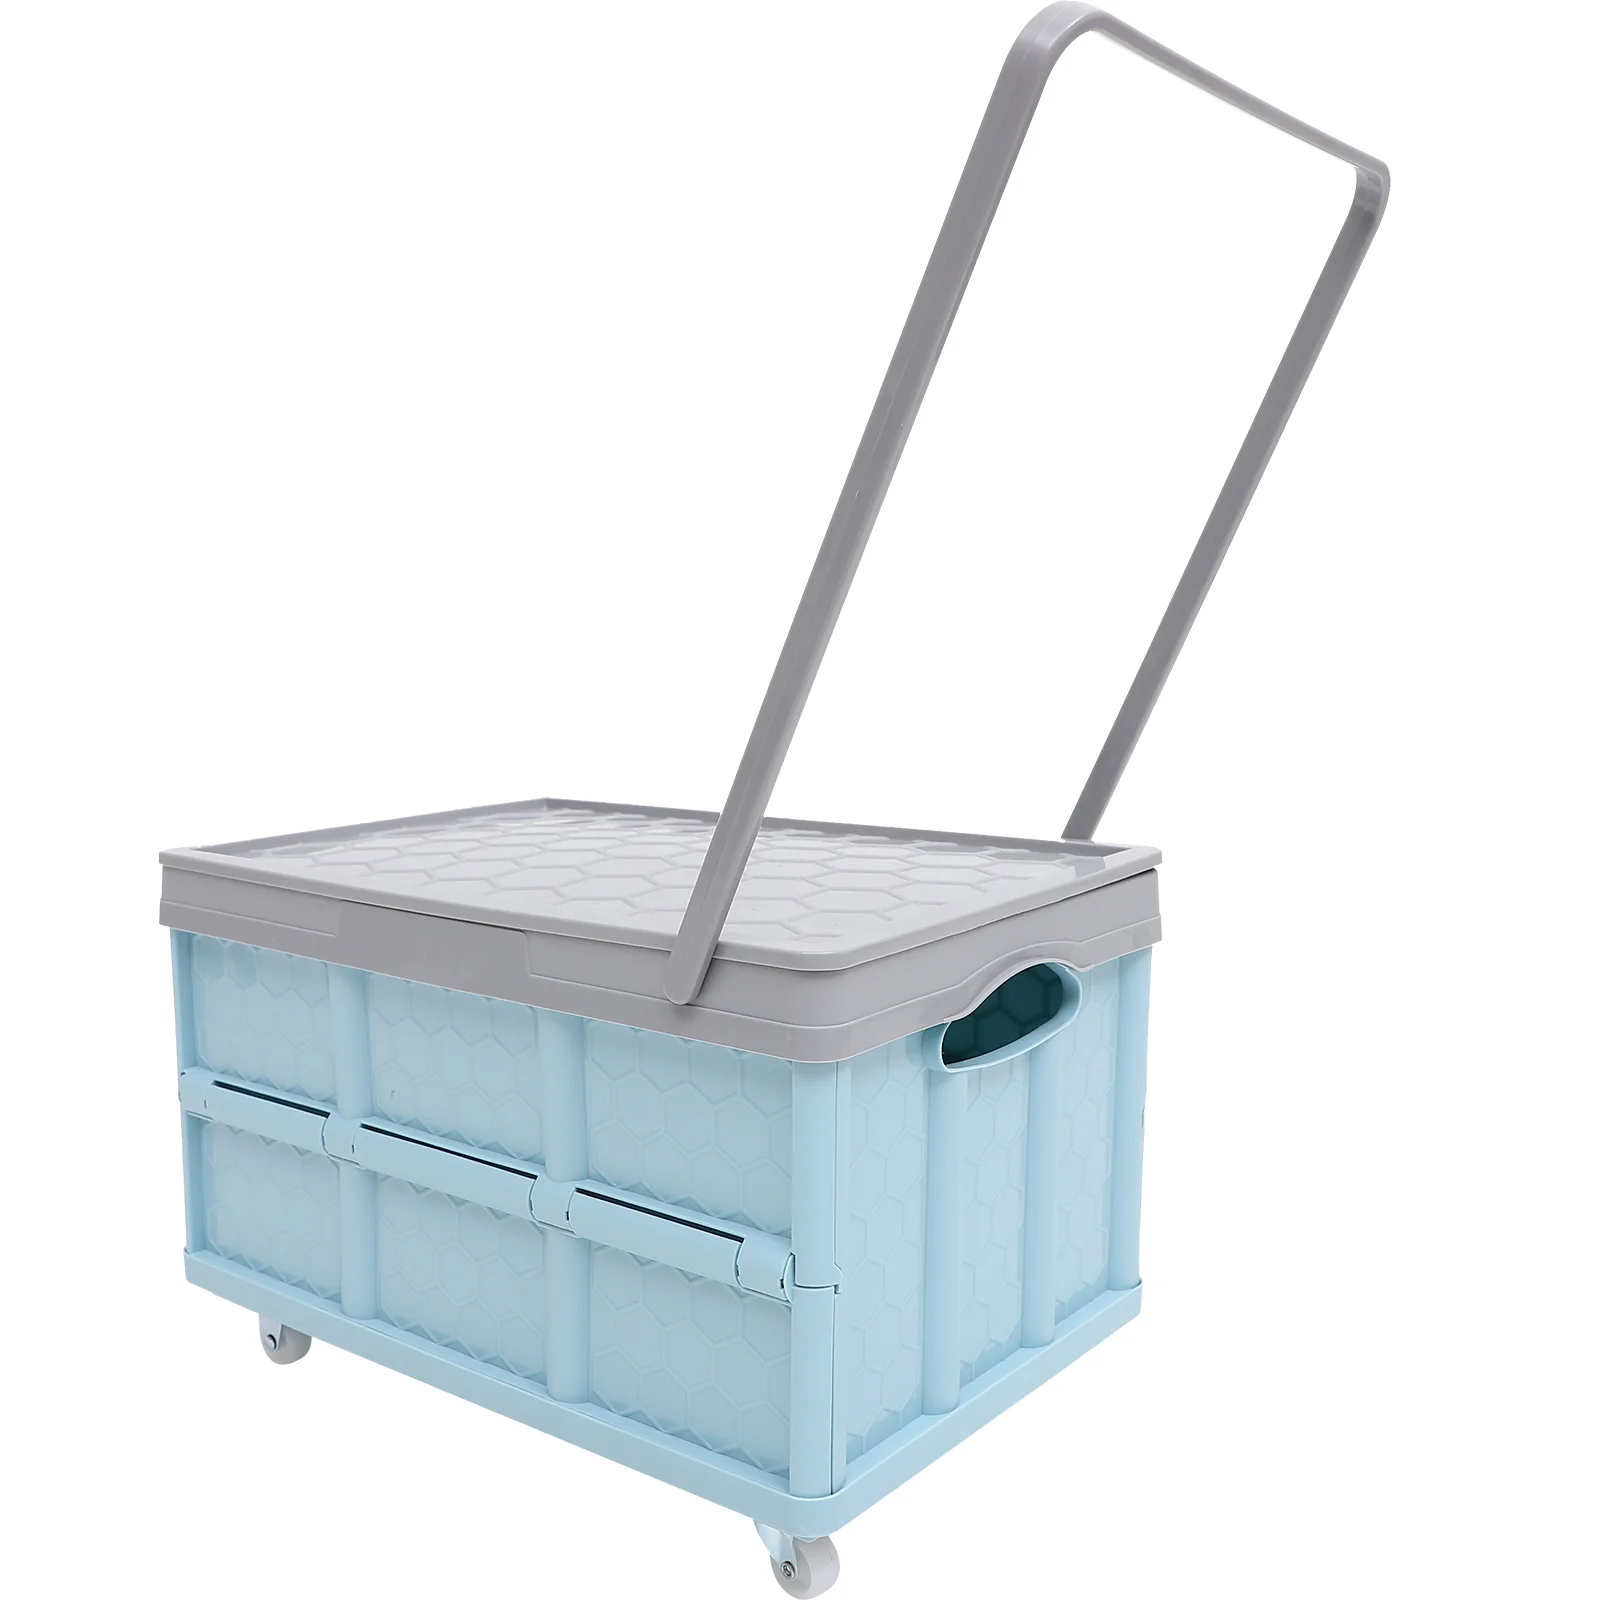 

English title: Alipis Collapsible Rolling Crate Wheels Foldable Utility Cart Handcart Shopping Trolley Travel Shopping Moving